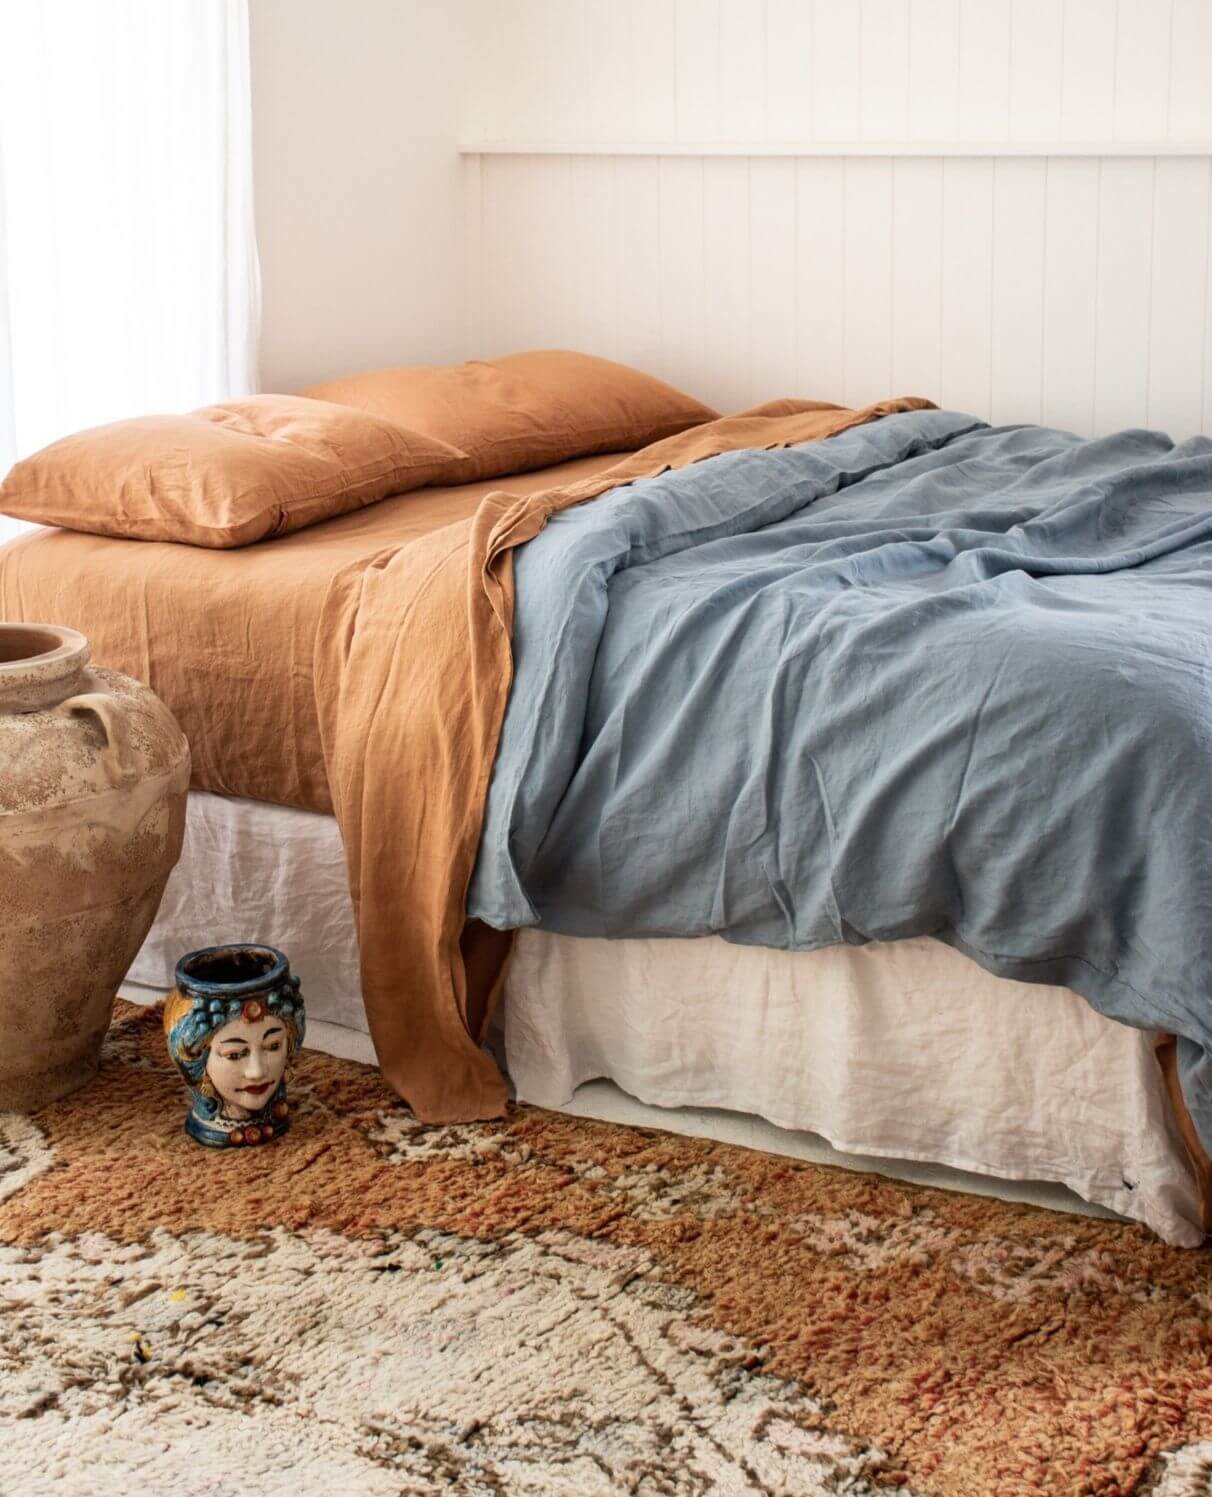 13- Remove odors and even stains from blankets, comforters, pillows, and rugs